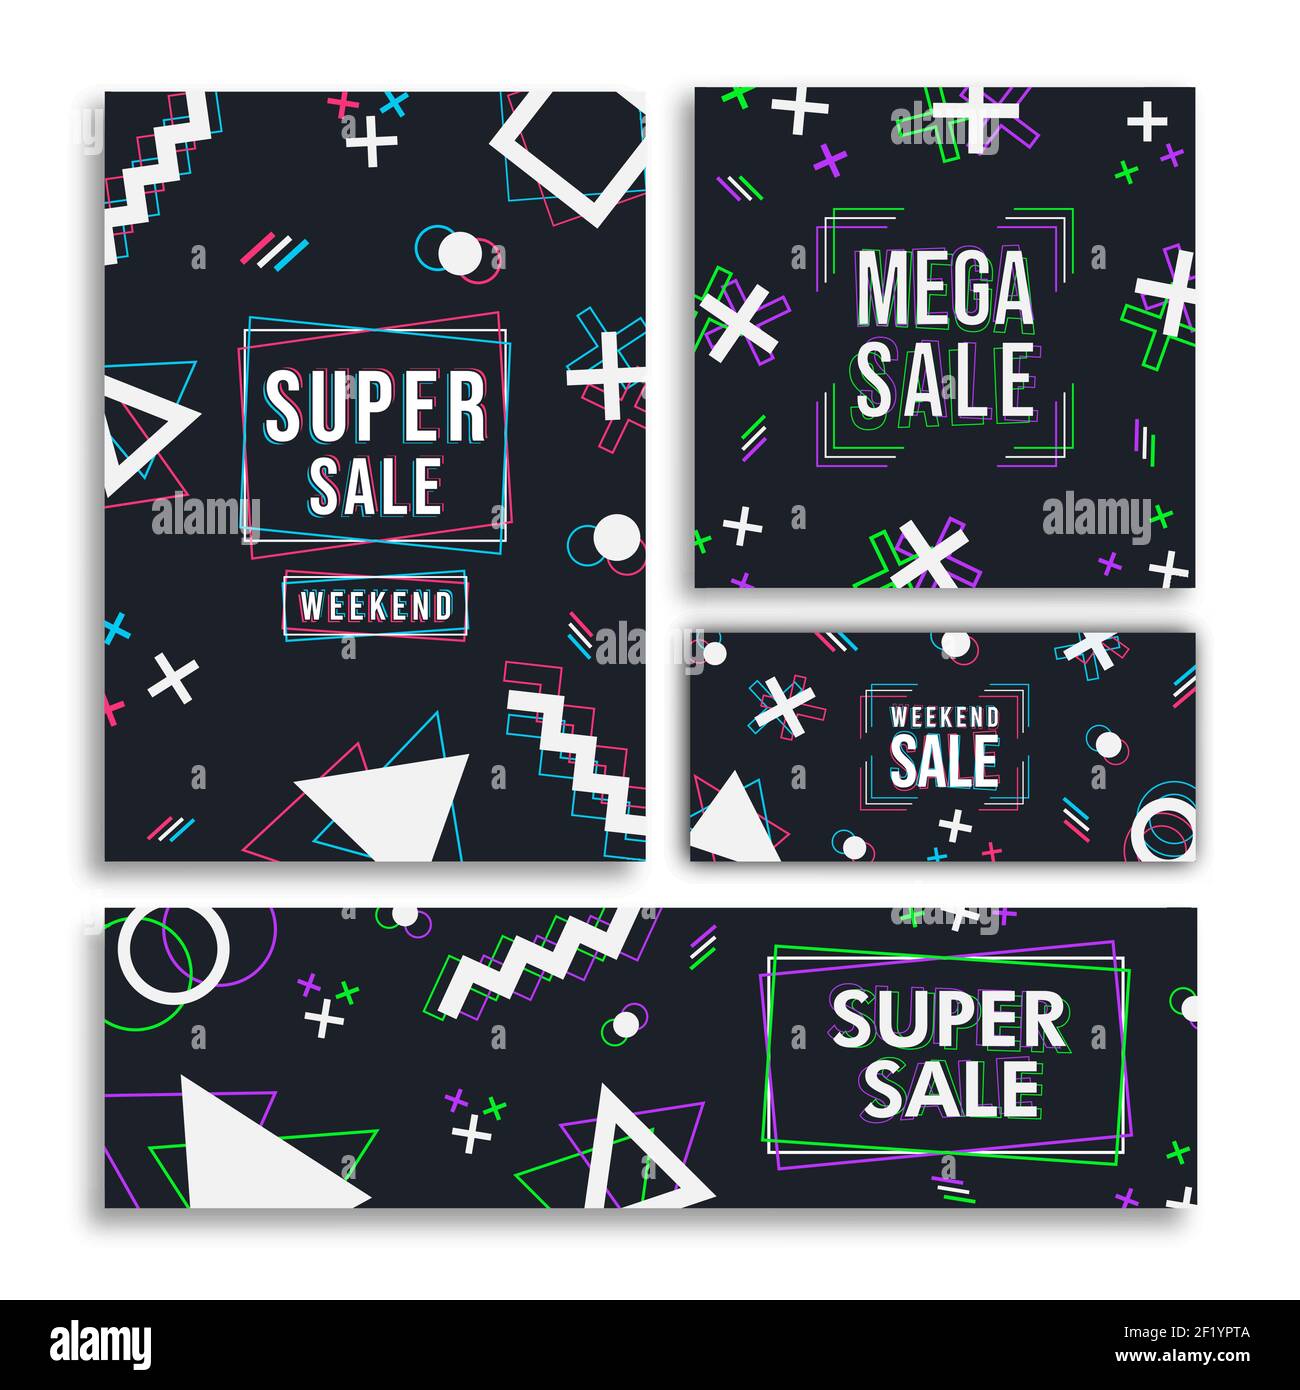 Modern sale template poster set. Abstract holographic geometric shape design collection for web business promotion, special discount event label bundl Stock Vector